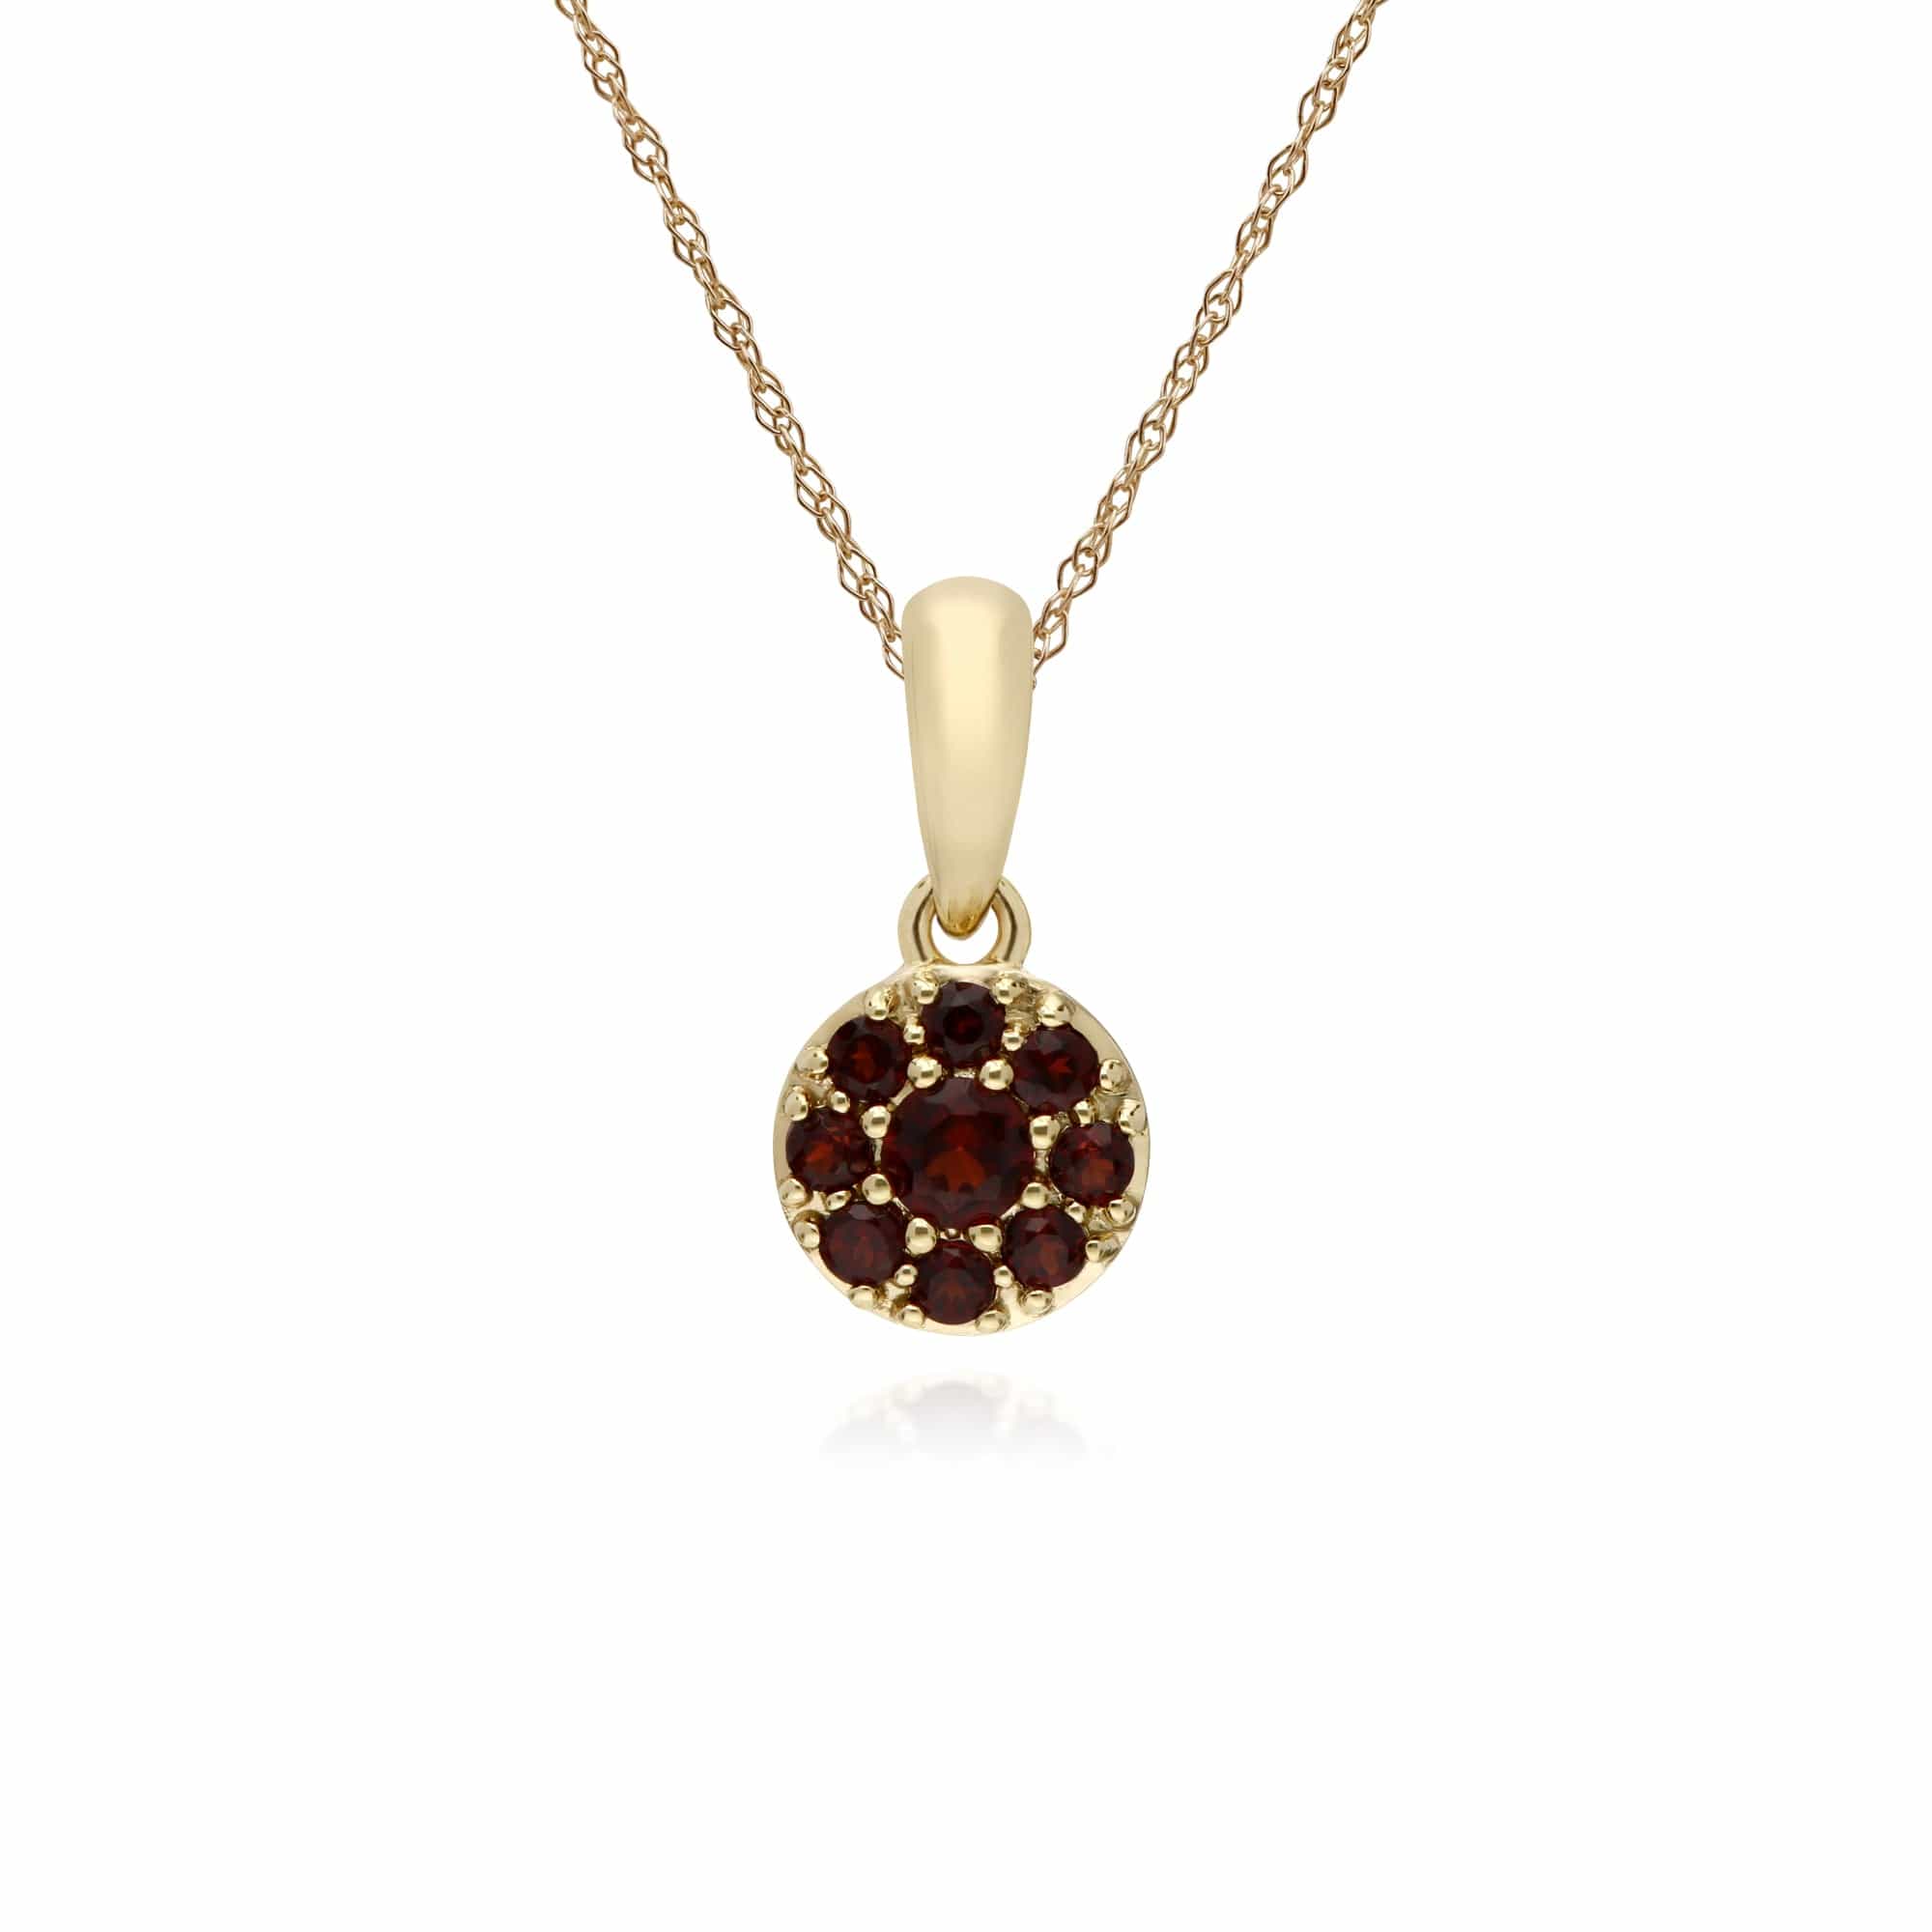 135E1573069-135P1910069 Classic Round Garnet Cluster Drop Earrings & Pendant Set in 9ct Yellow Gold 3